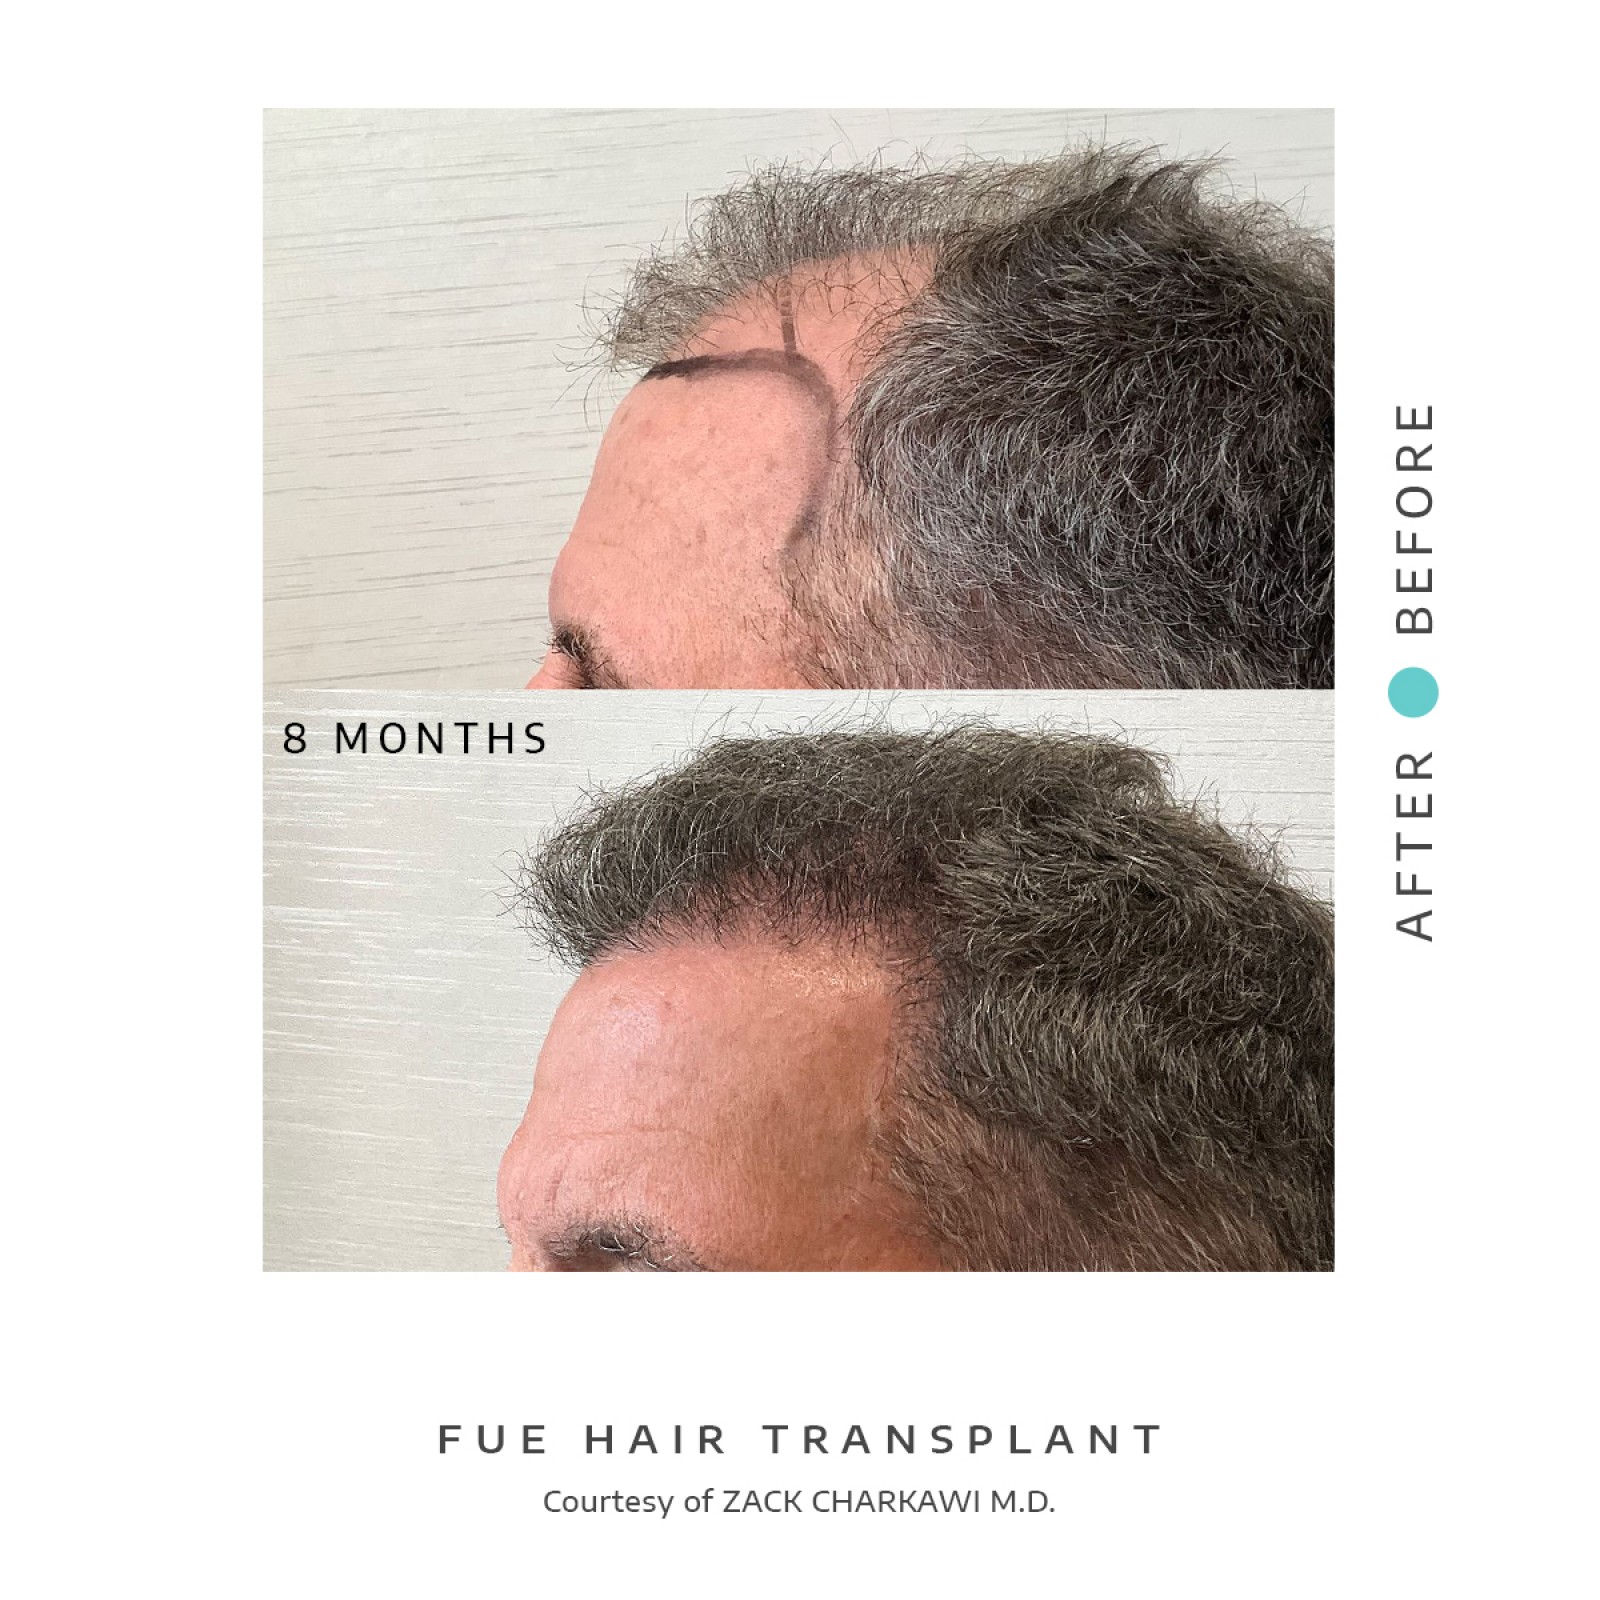 In the left image, a close-up reveals significant balding and thinning hair on a man's head, with visible scalp patches indicating notable hair loss. Conversely, the right image highlights the dramatic outcome of a successful hair transplant procedure. Now, the previously barren scalp displays a luxuriant, natural-looking hair growth, skillfully masking previous bald patches and evoking a sense of fullness and revitalization.